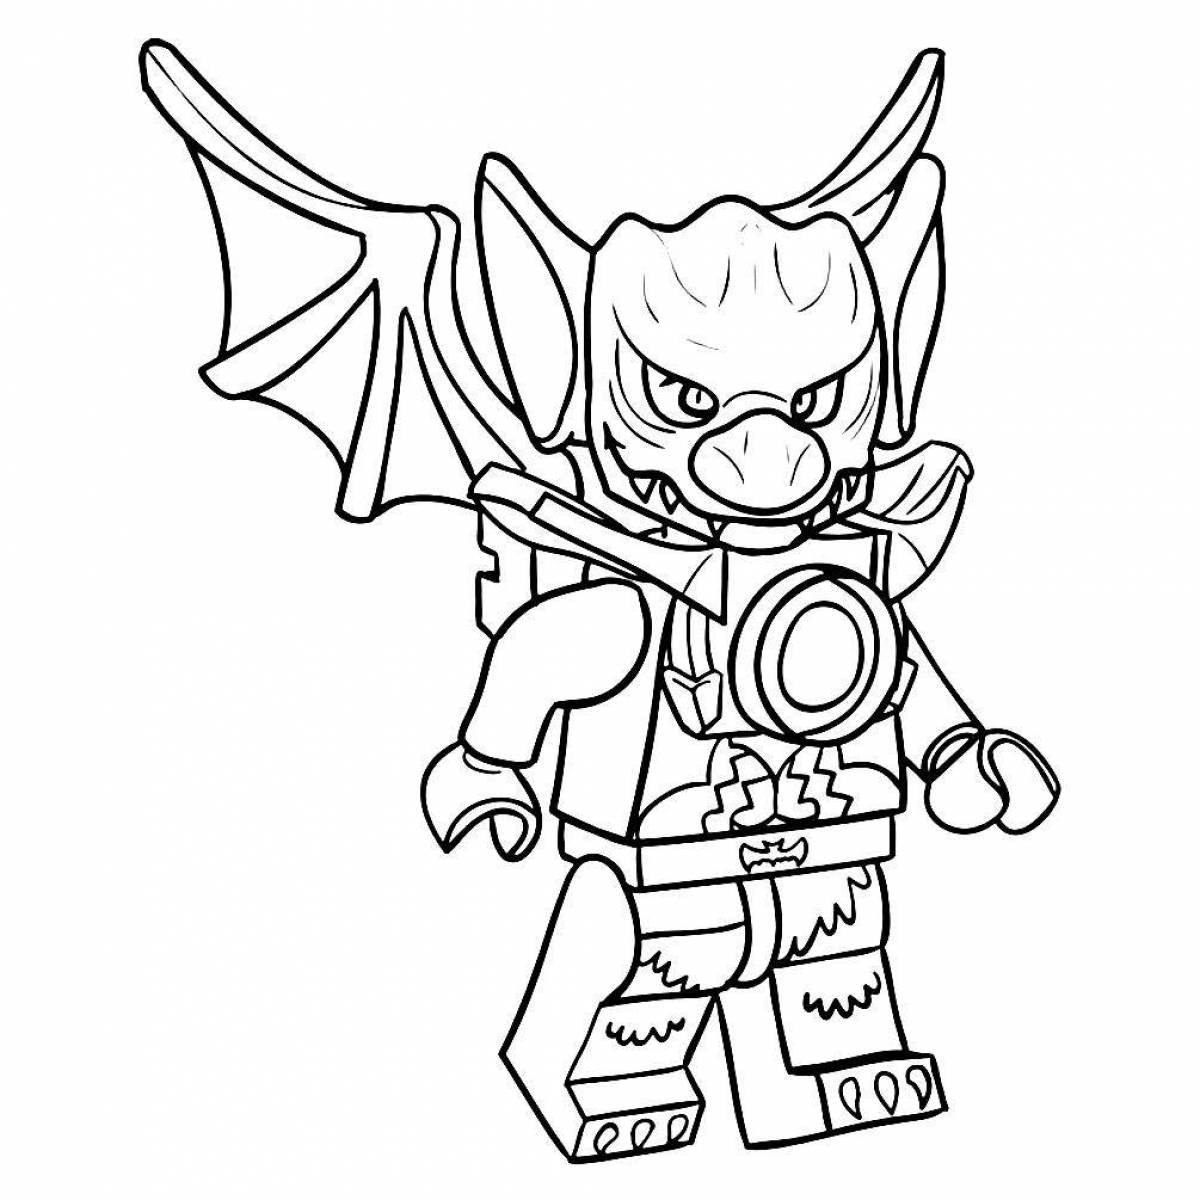 Attractive lego chima coloring page